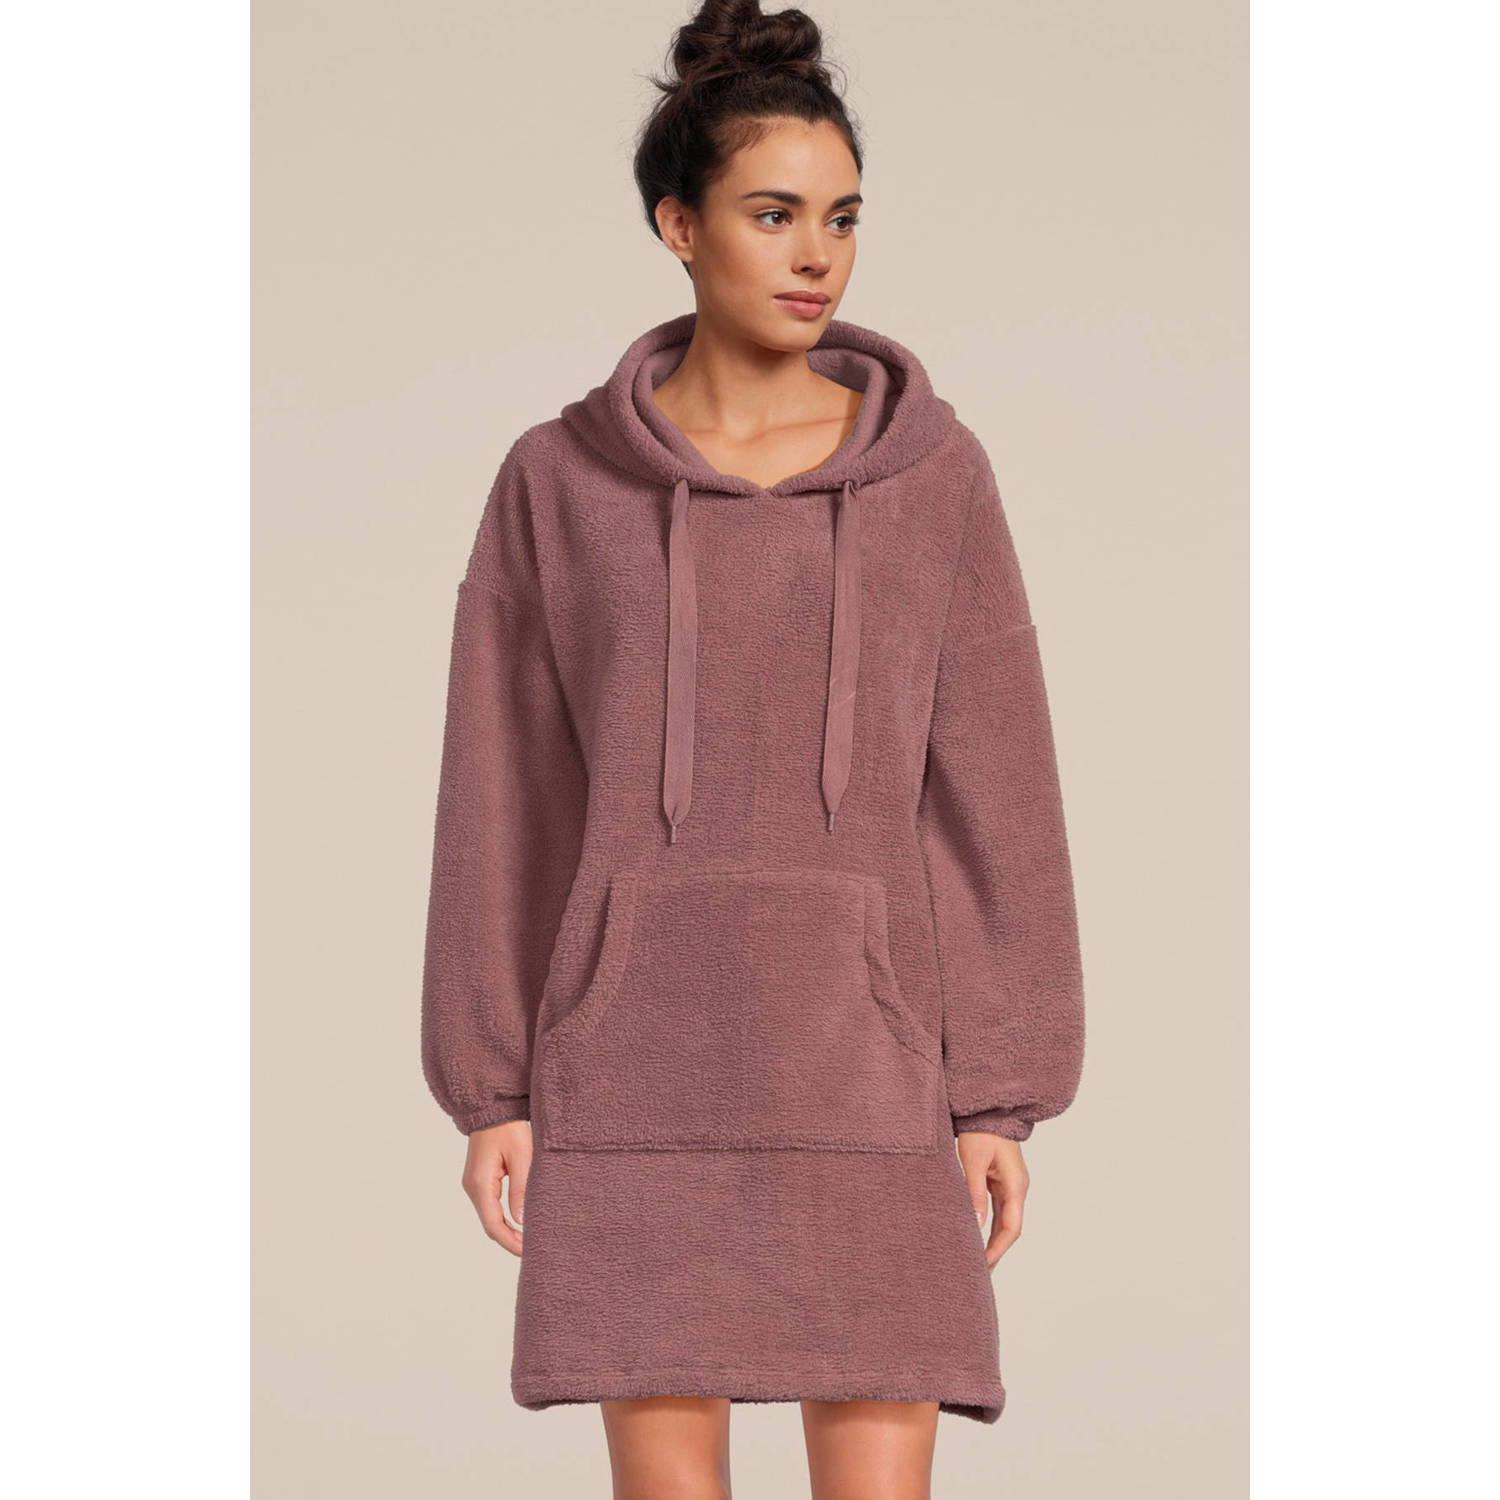 Dreamcovers teddy loungejurk met capuchon mauve